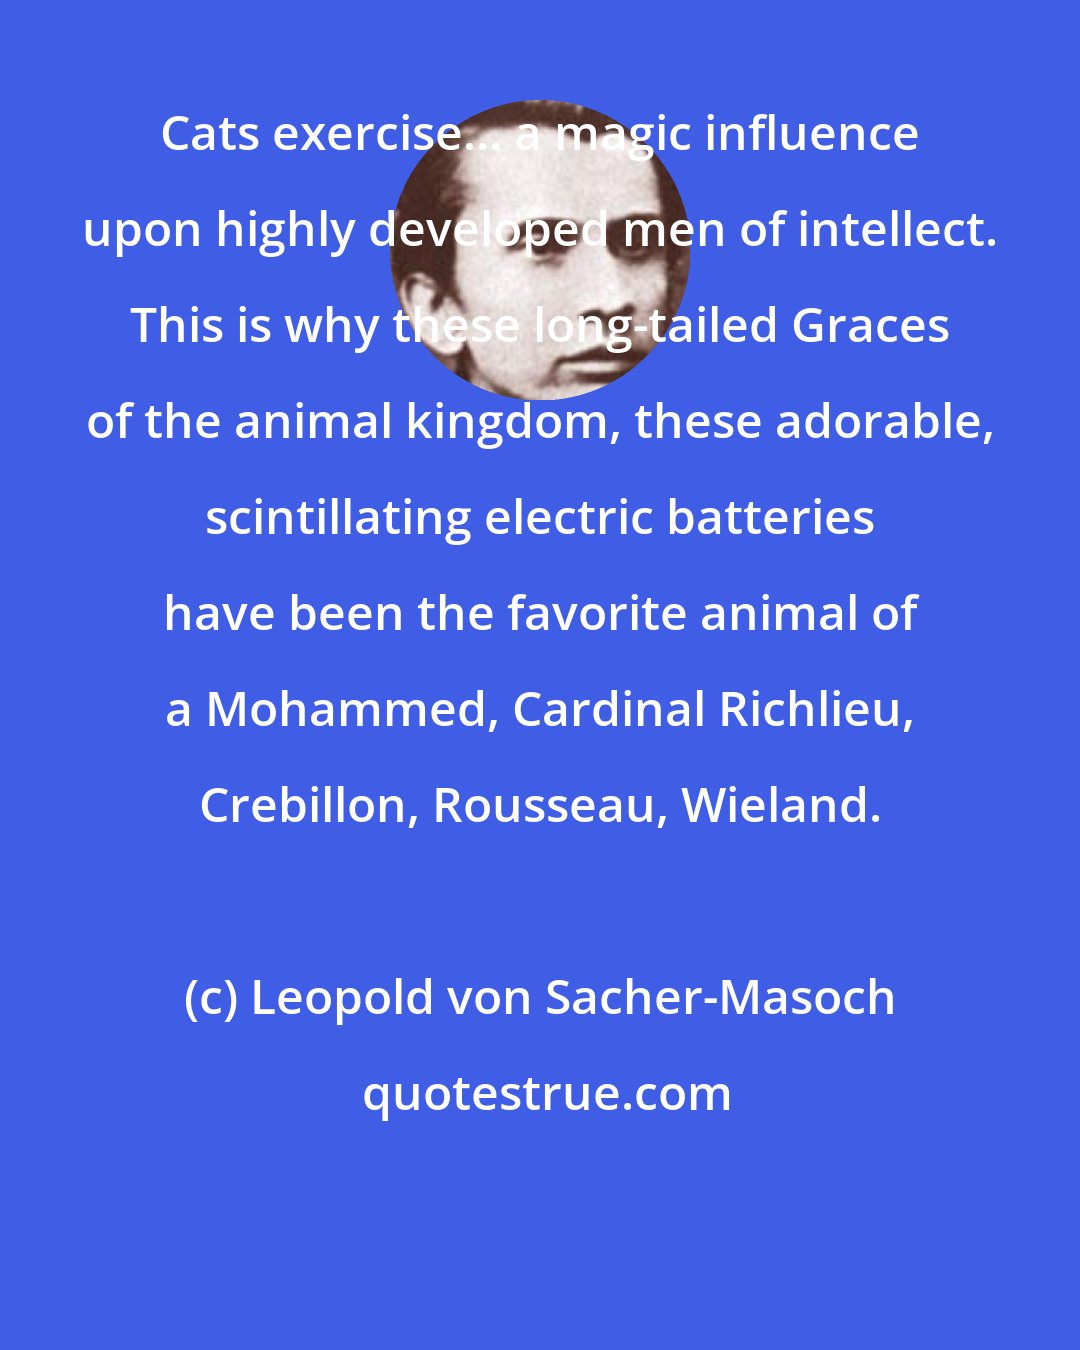 Leopold von Sacher-Masoch: Cats exercise... a magic influence upon highly developed men of intellect. This is why these long-tailed Graces of the animal kingdom, these adorable, scintillating electric batteries have been the favorite animal of a Mohammed, Cardinal Richlieu, Crebillon, Rousseau, Wieland.